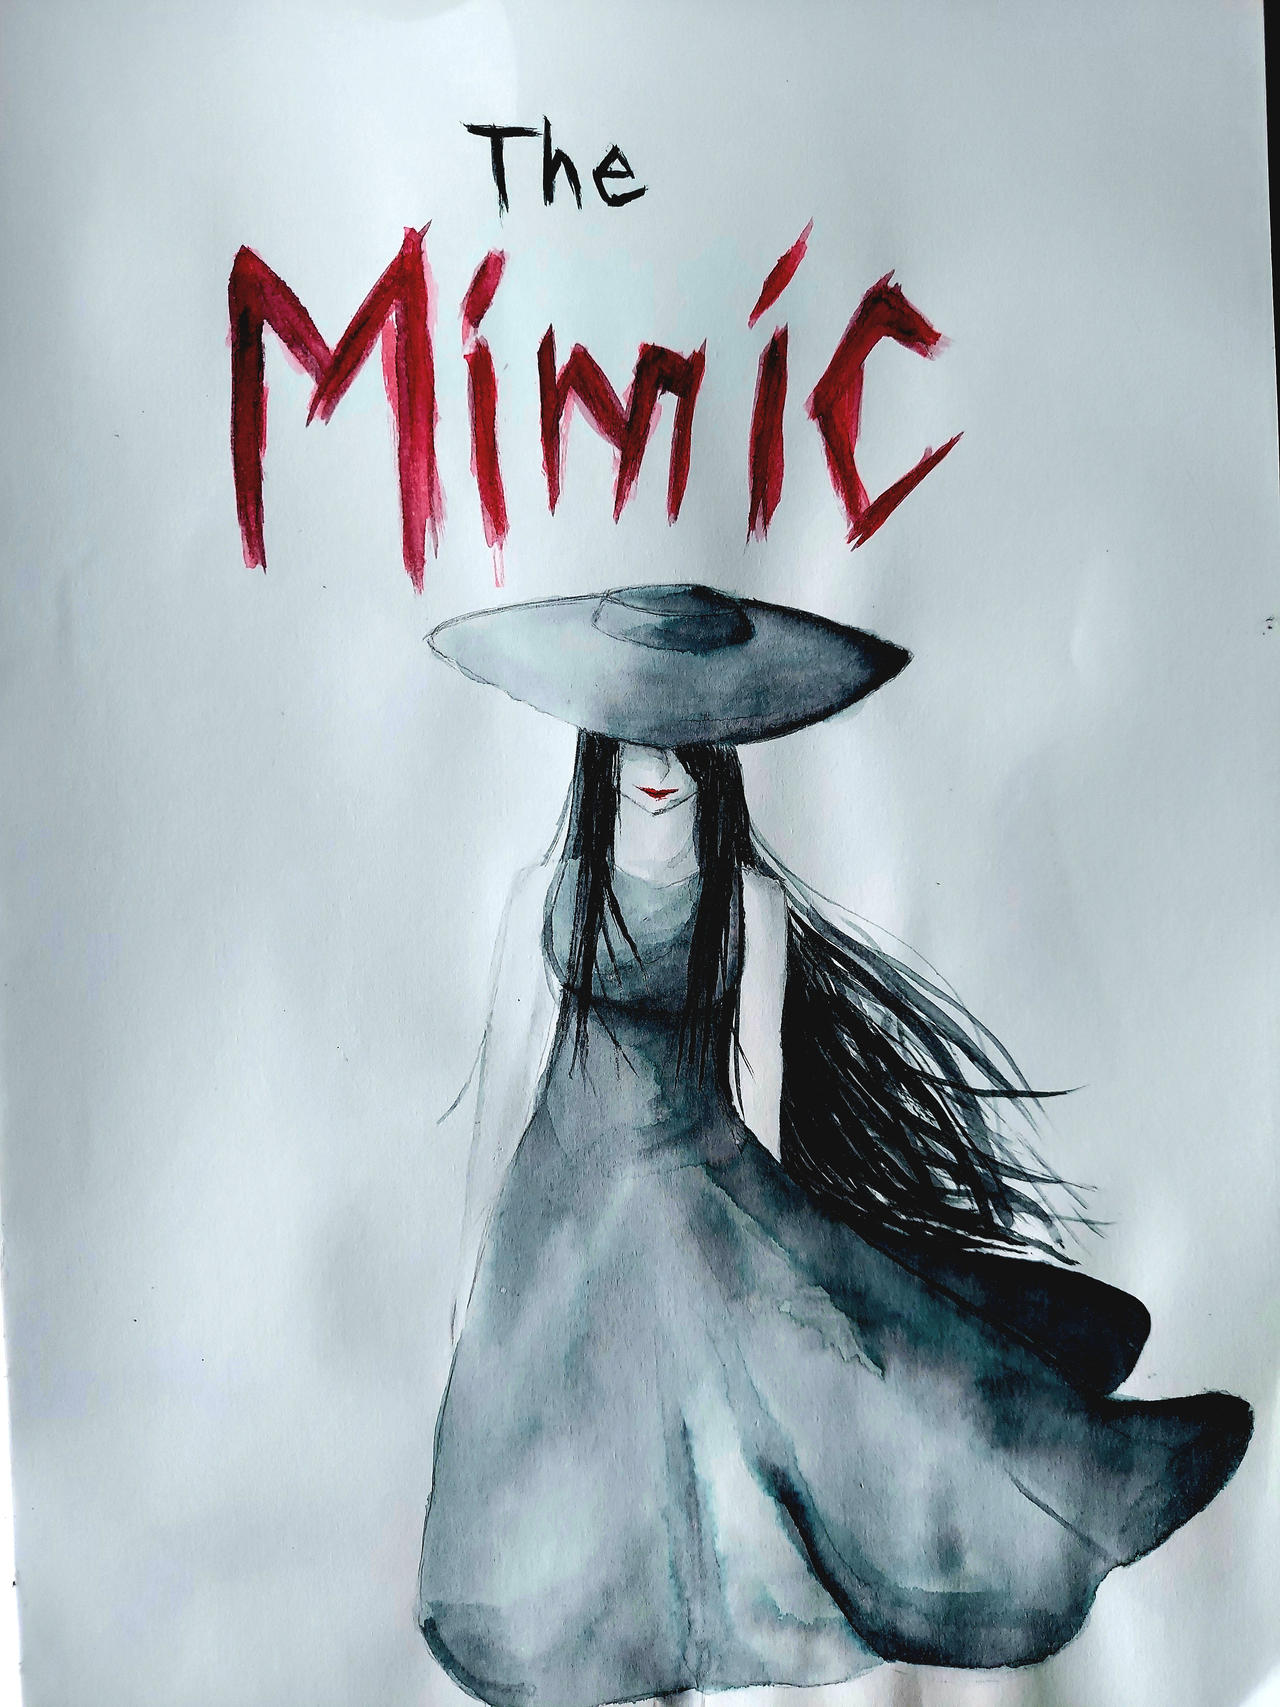 If The Mimic had a movie/book cover #themimic #art #digitalart #roblox